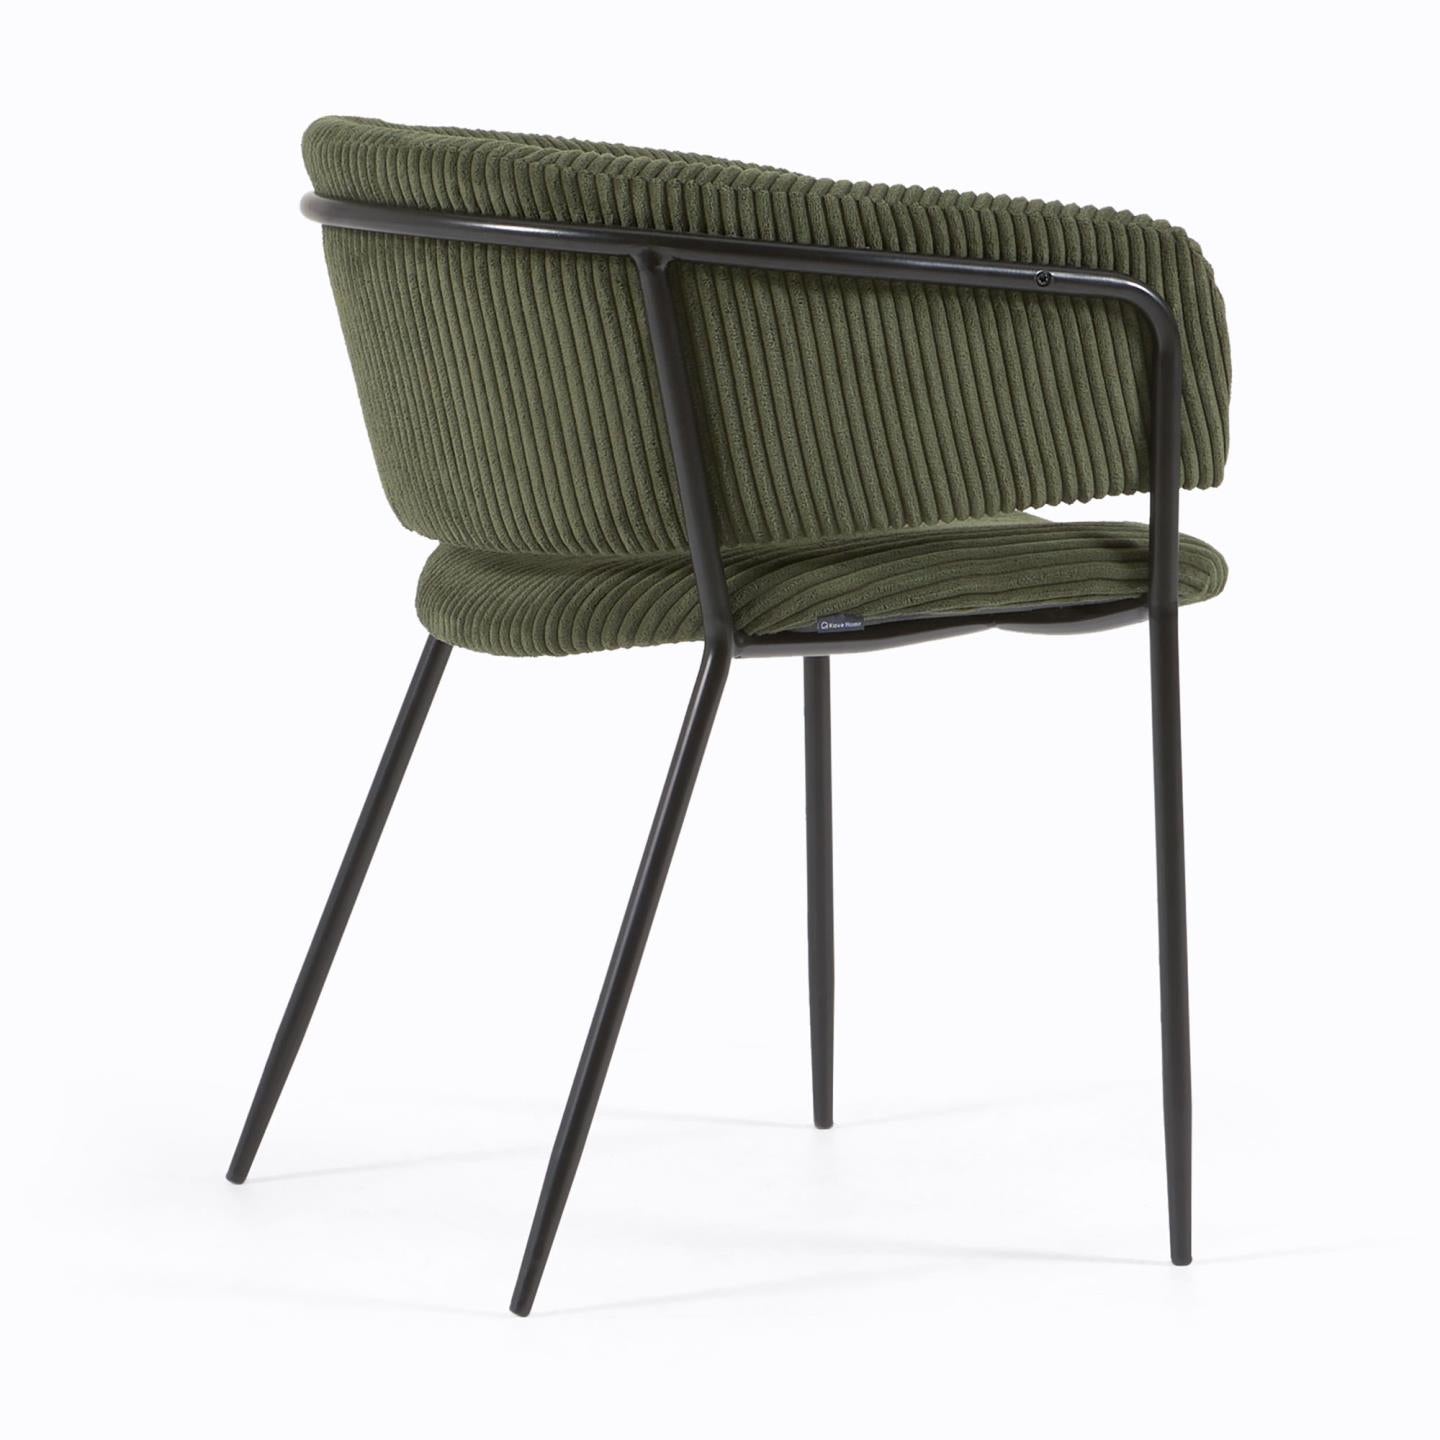 Runnie chair made from dark green wide seam corduroy and steel legs with black finish